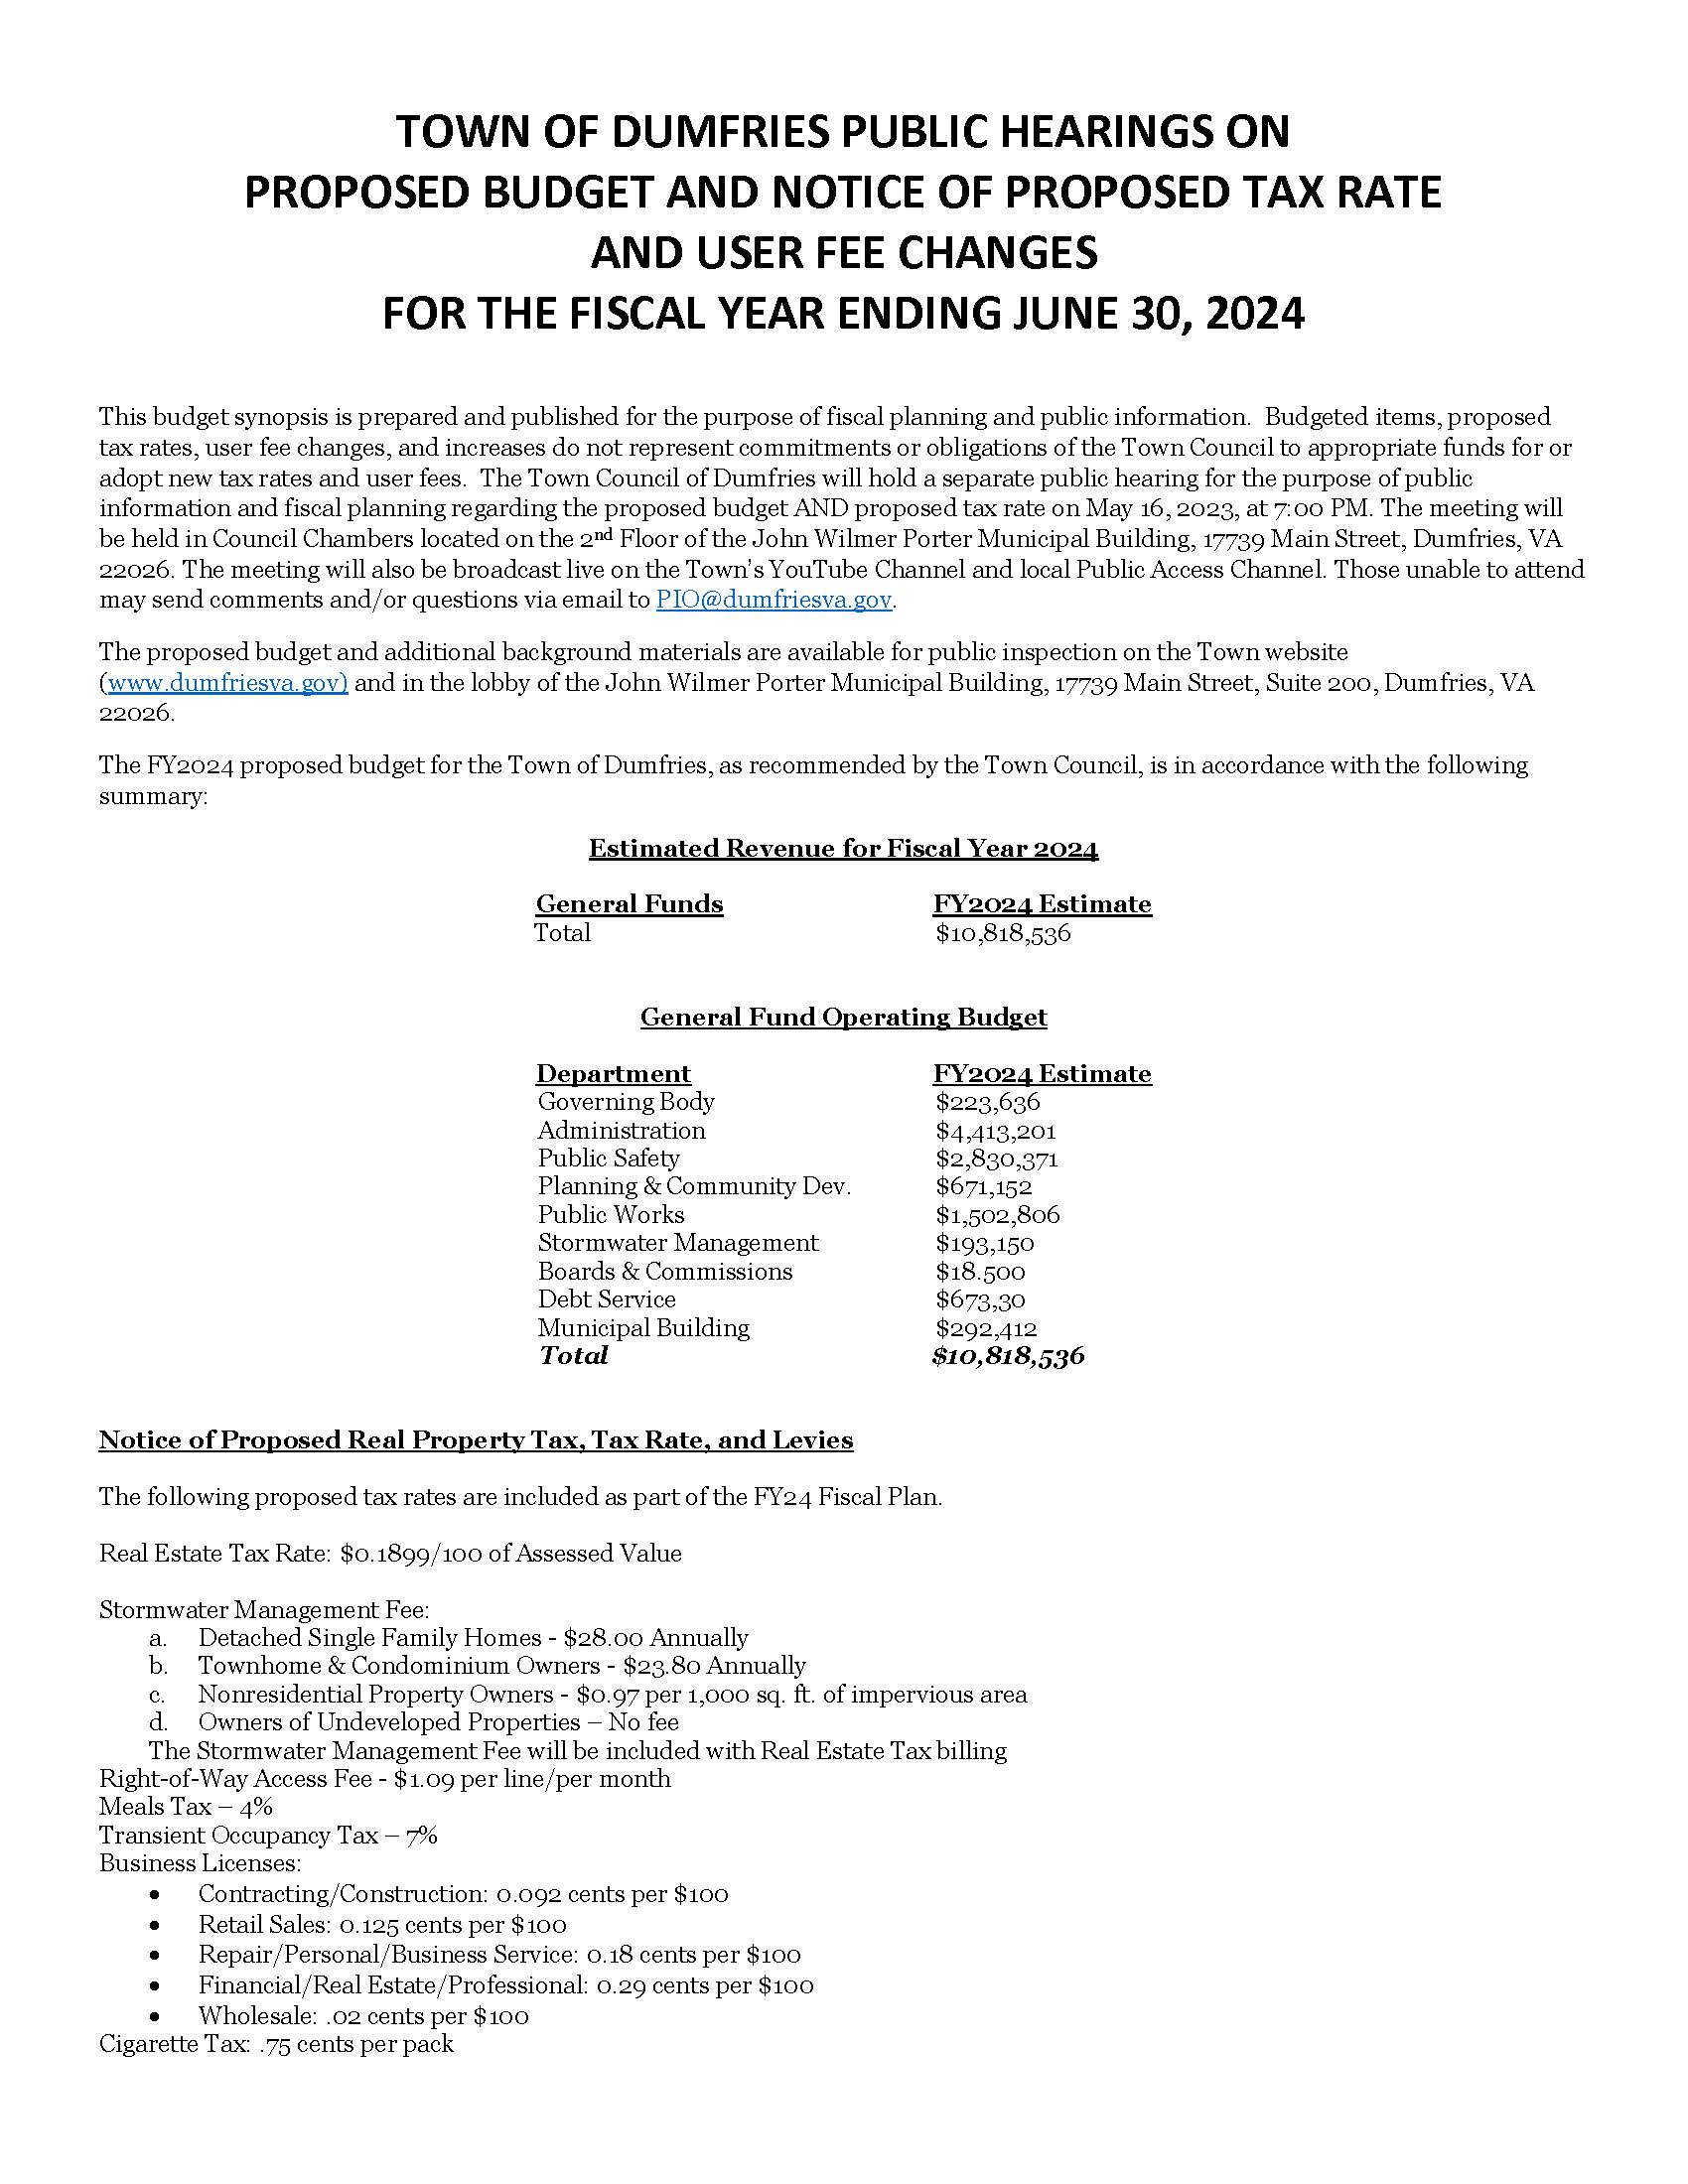 TOWN OF DUMFRIES BUDGET FY24 PUBLIC HEARING NOTICE FINAL